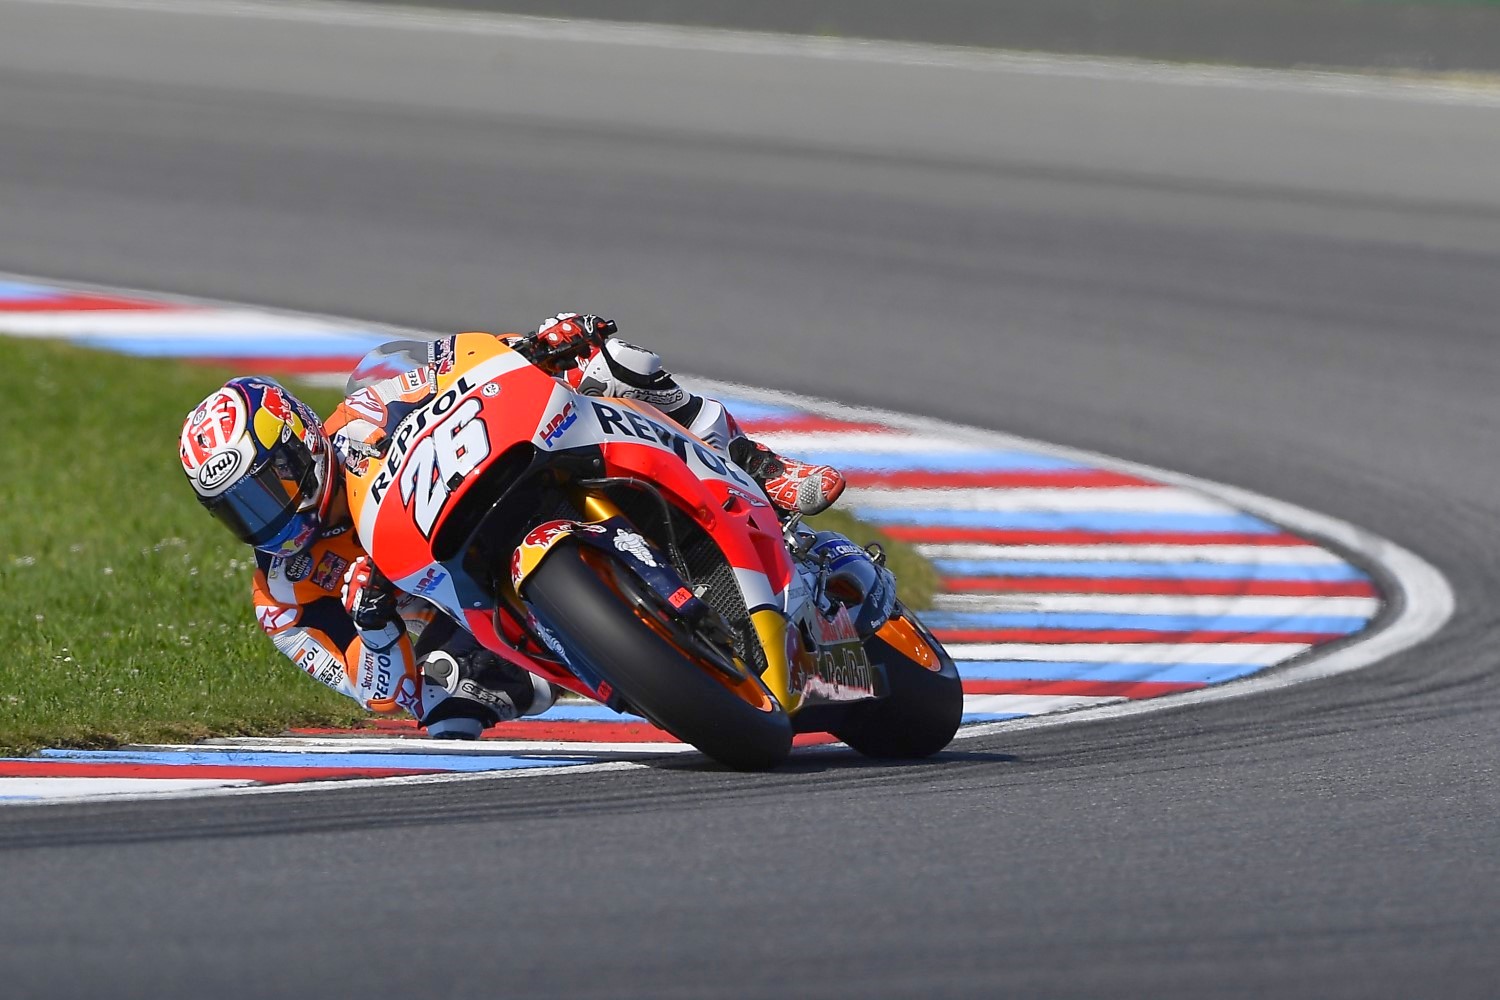 Pedrosa races to 2nd place